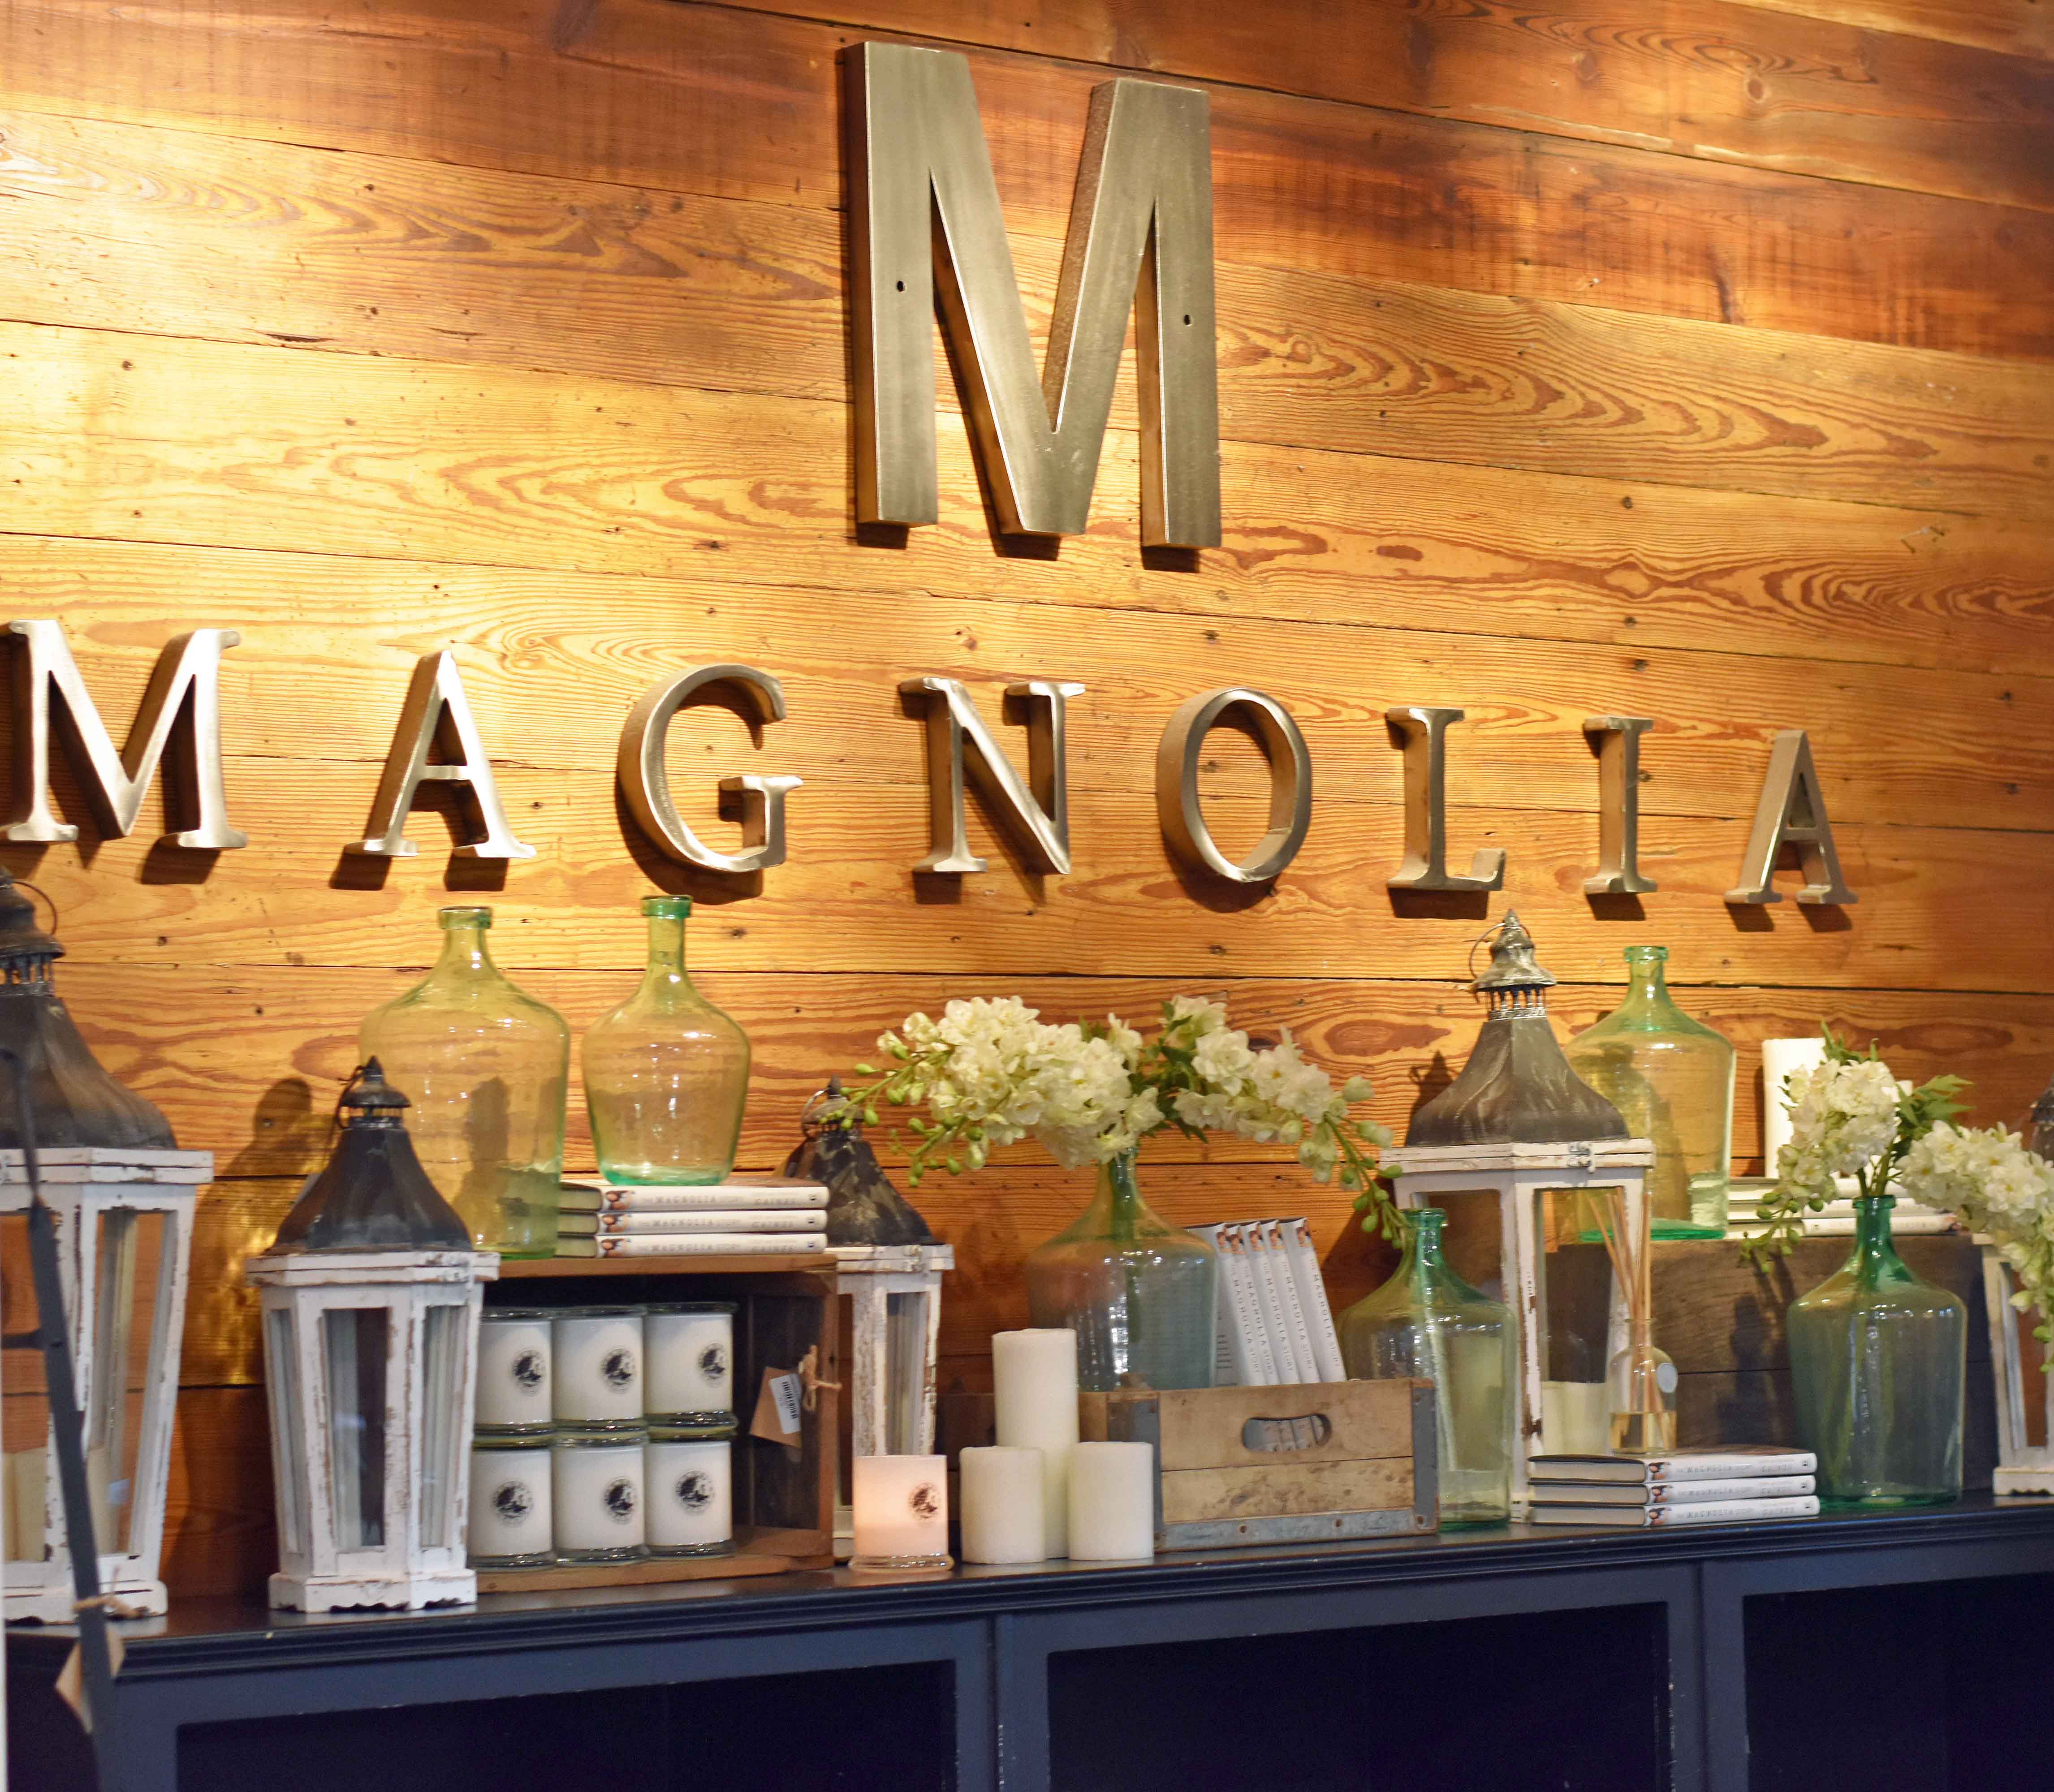 How to plan the perfect trip to Magnolia Market at the Silos in Waco Texas. Magnolia Market was created by HGTV's Fixer Upper favorite couple, Chip and Joanna Gaines. Visit Magnolia Market, Silo Baking Co. and the beautiful grounds. Tips for planning a trip to Magnolia Market. www.modernhoney.com